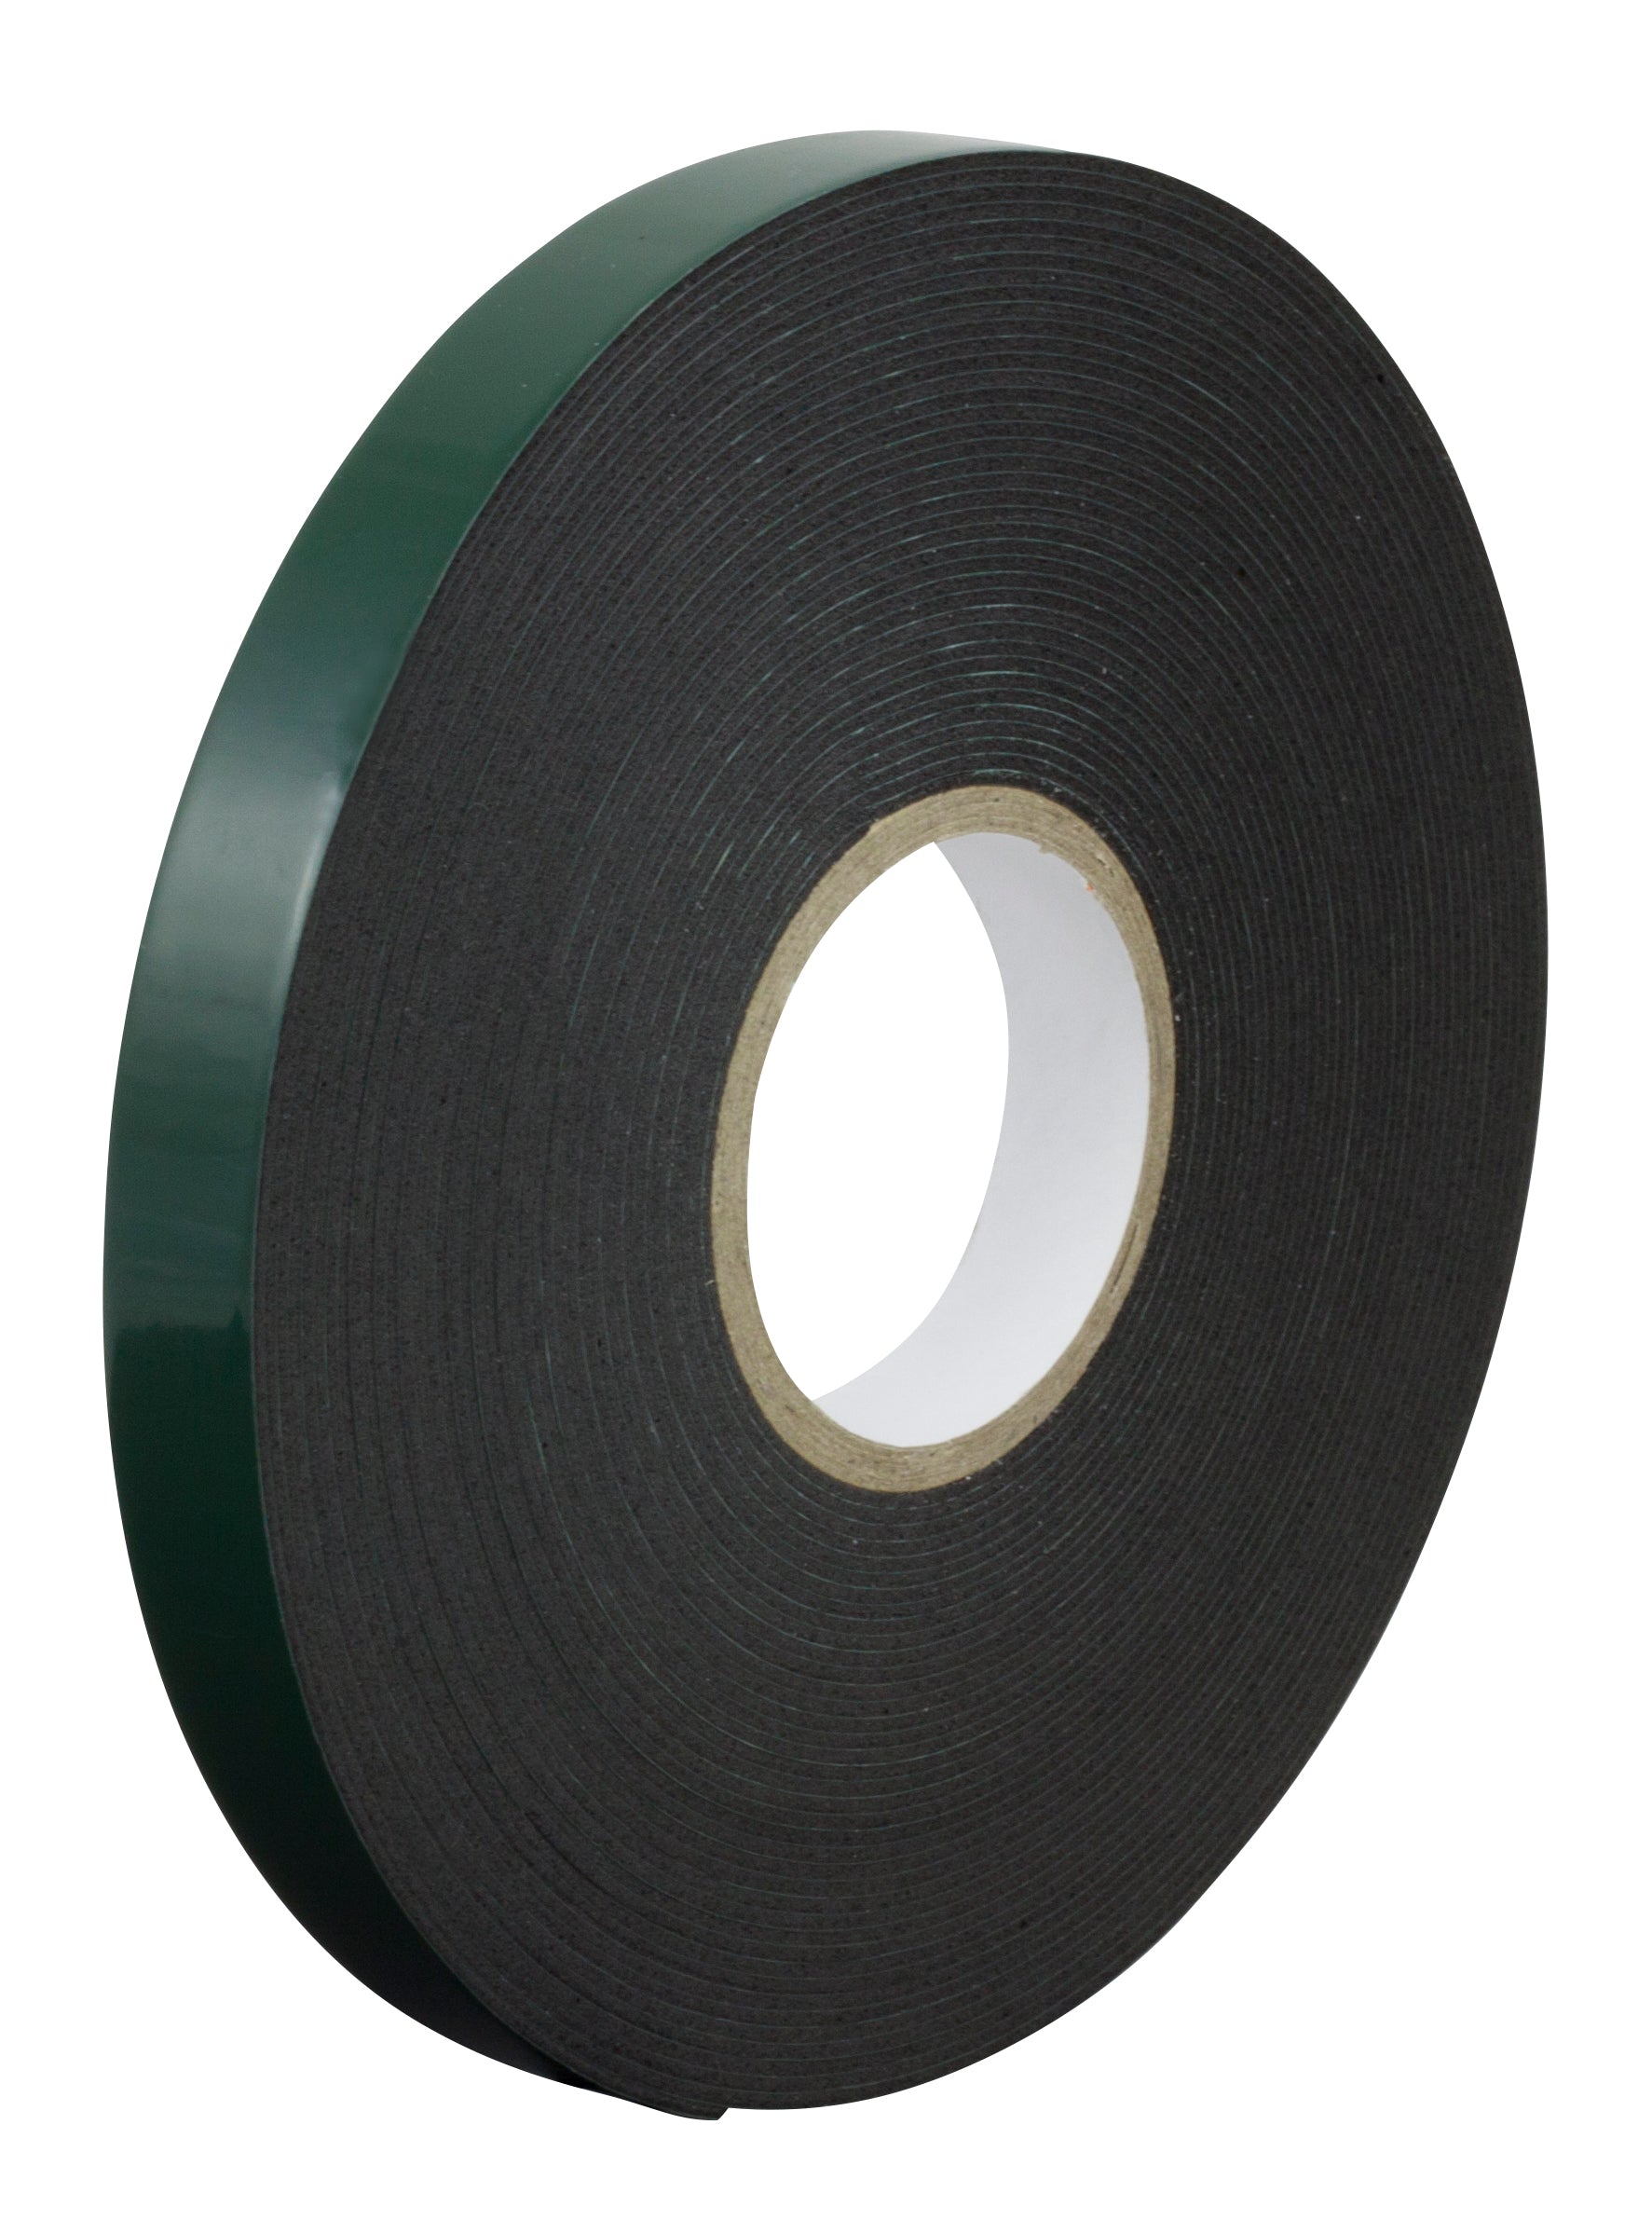 Double Sided Foam Tape 50mm x 10m x 1mm Thickness - Per Pack